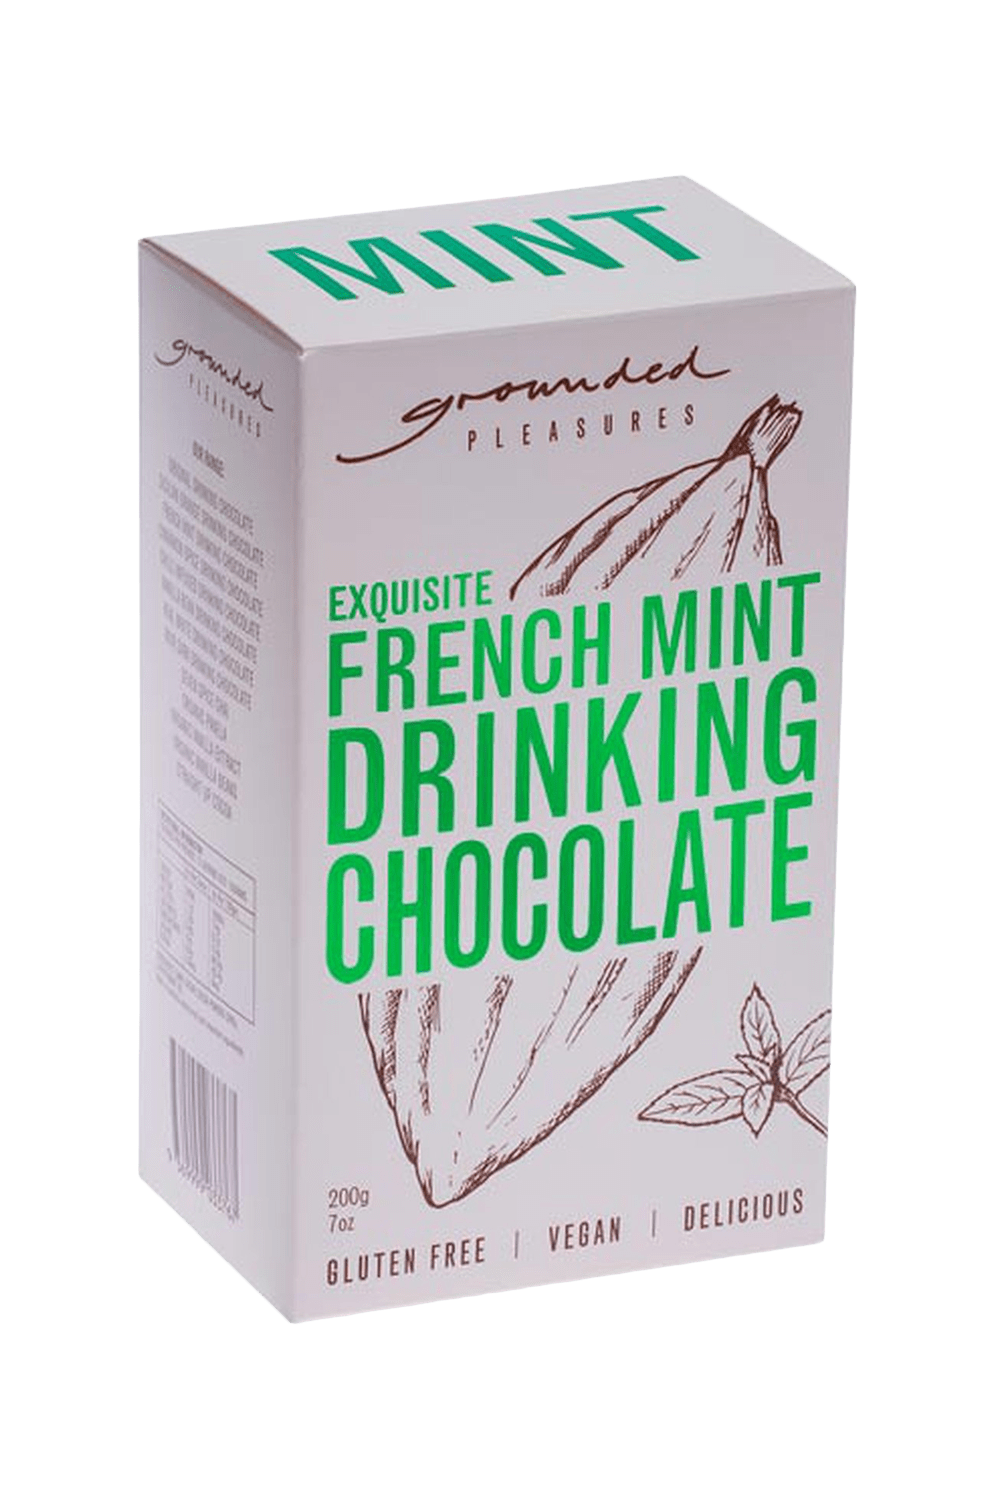 buy cafe products grounded pleasures drinking chocolate french mint drinking chocolate